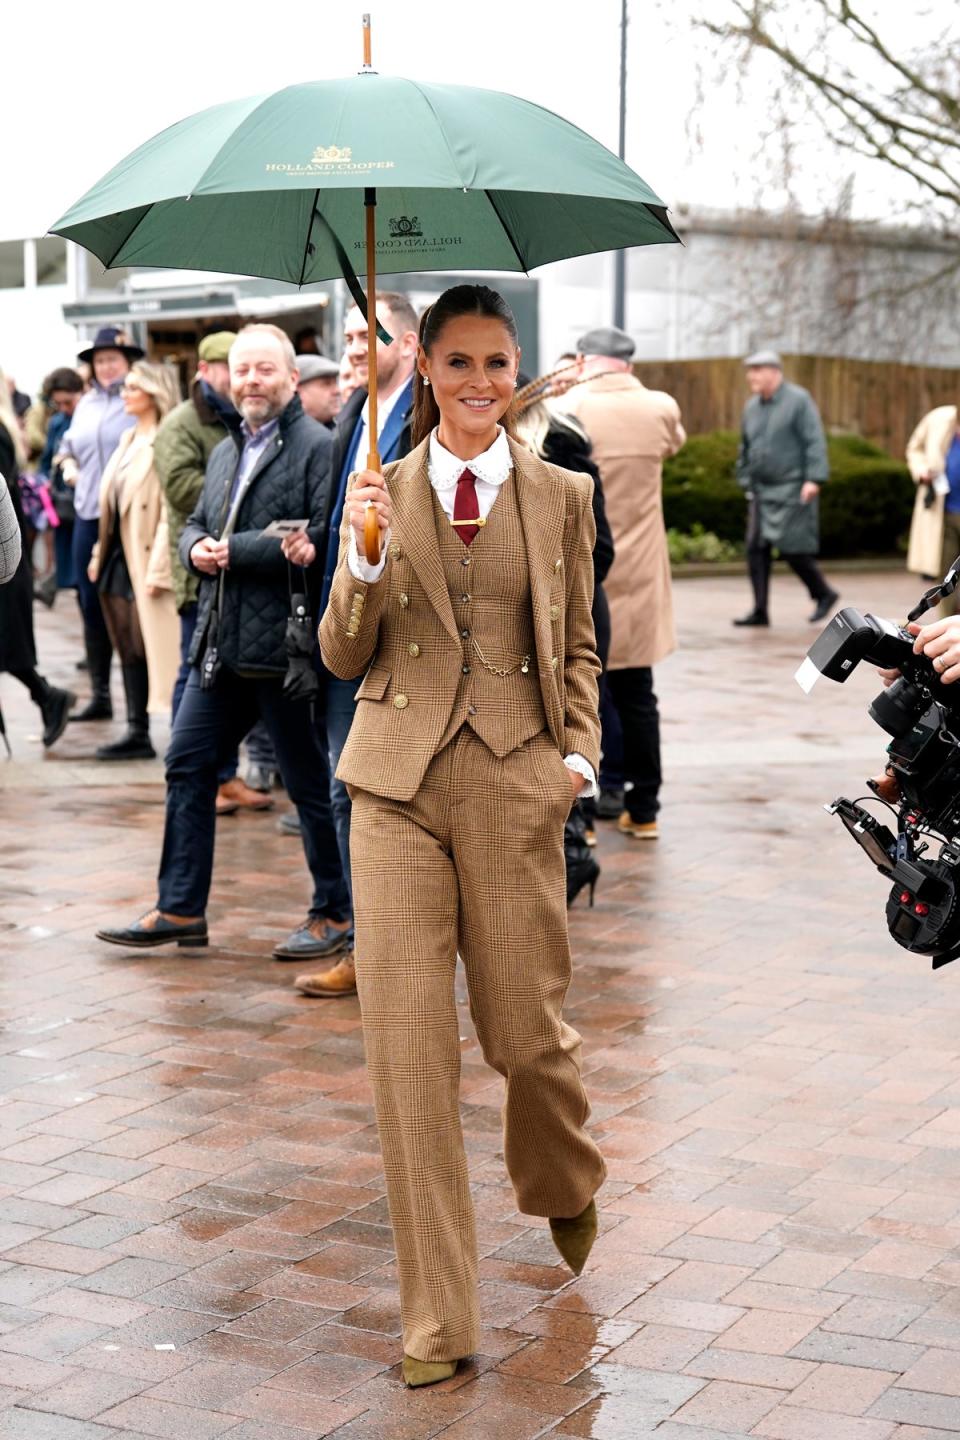 Fashion-forward: designer Jade Holland Cooper wears an eye-catching trouser suit (Andrew Matthews/PA Wire)